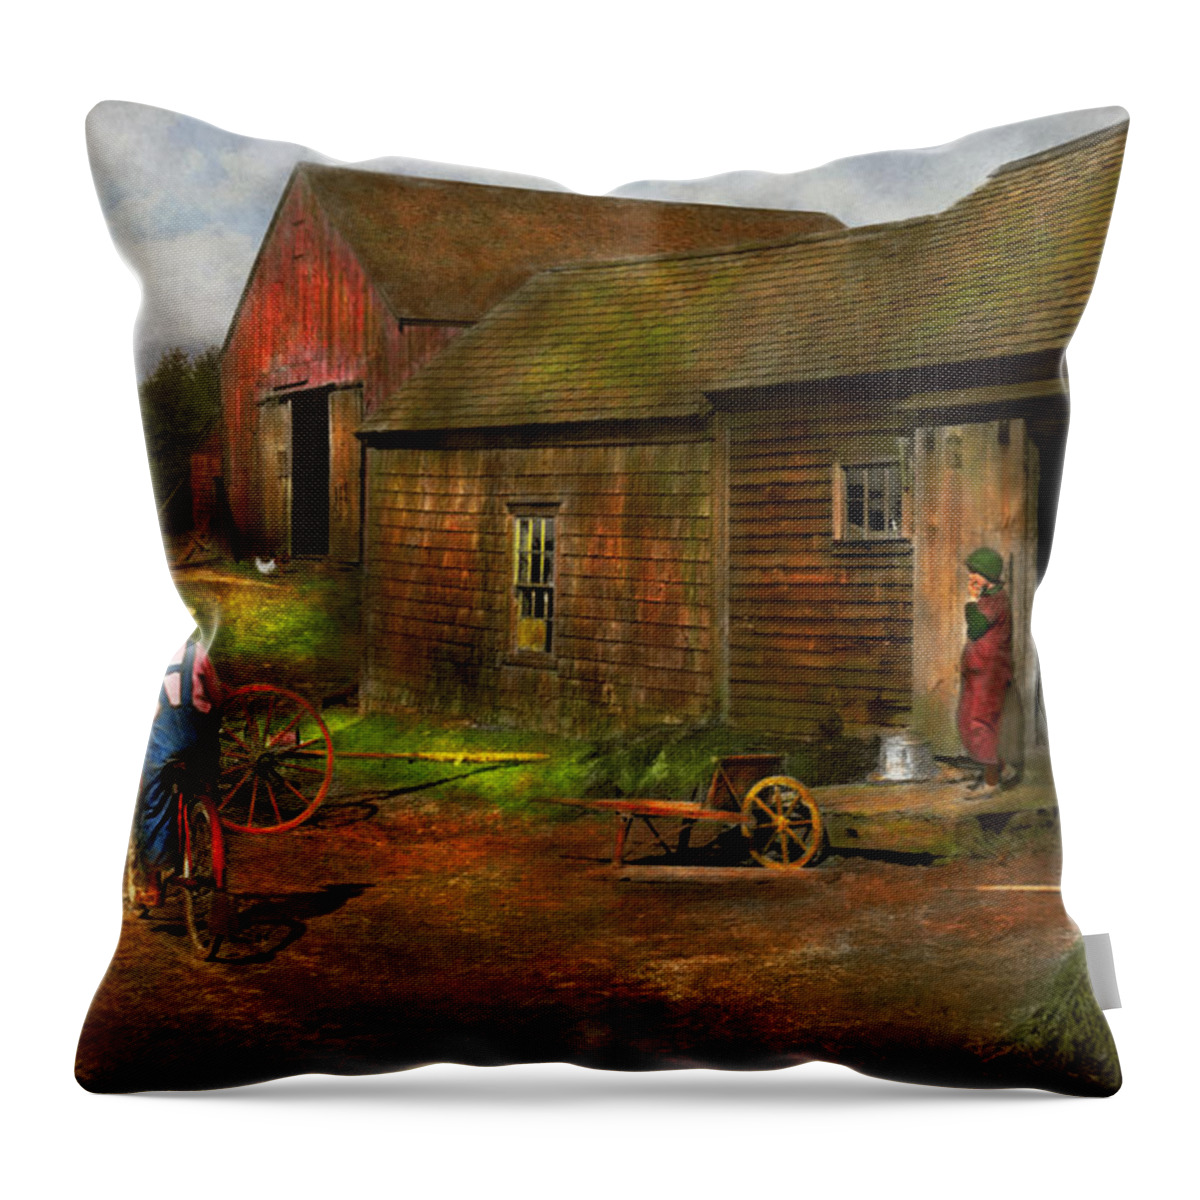 Country Throw Pillow featuring the photograph Farm - Life on the farm 1940s by Mike Savad